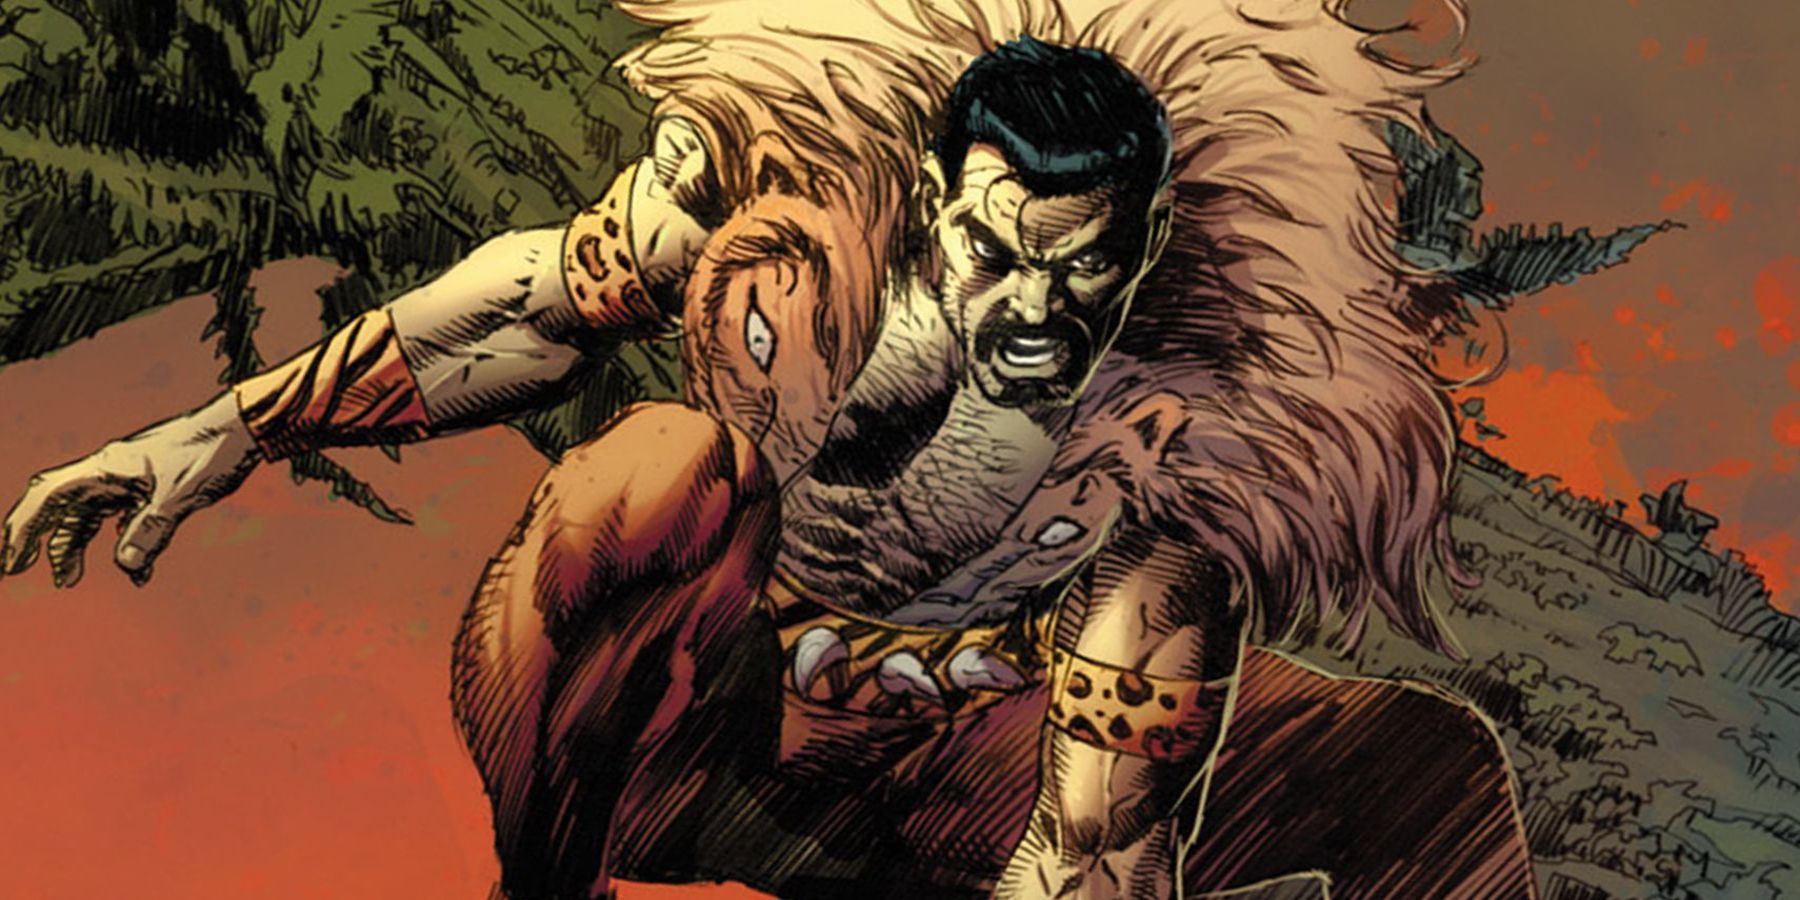 Kraven the Hunter crouched down in a Marvel comic illustration